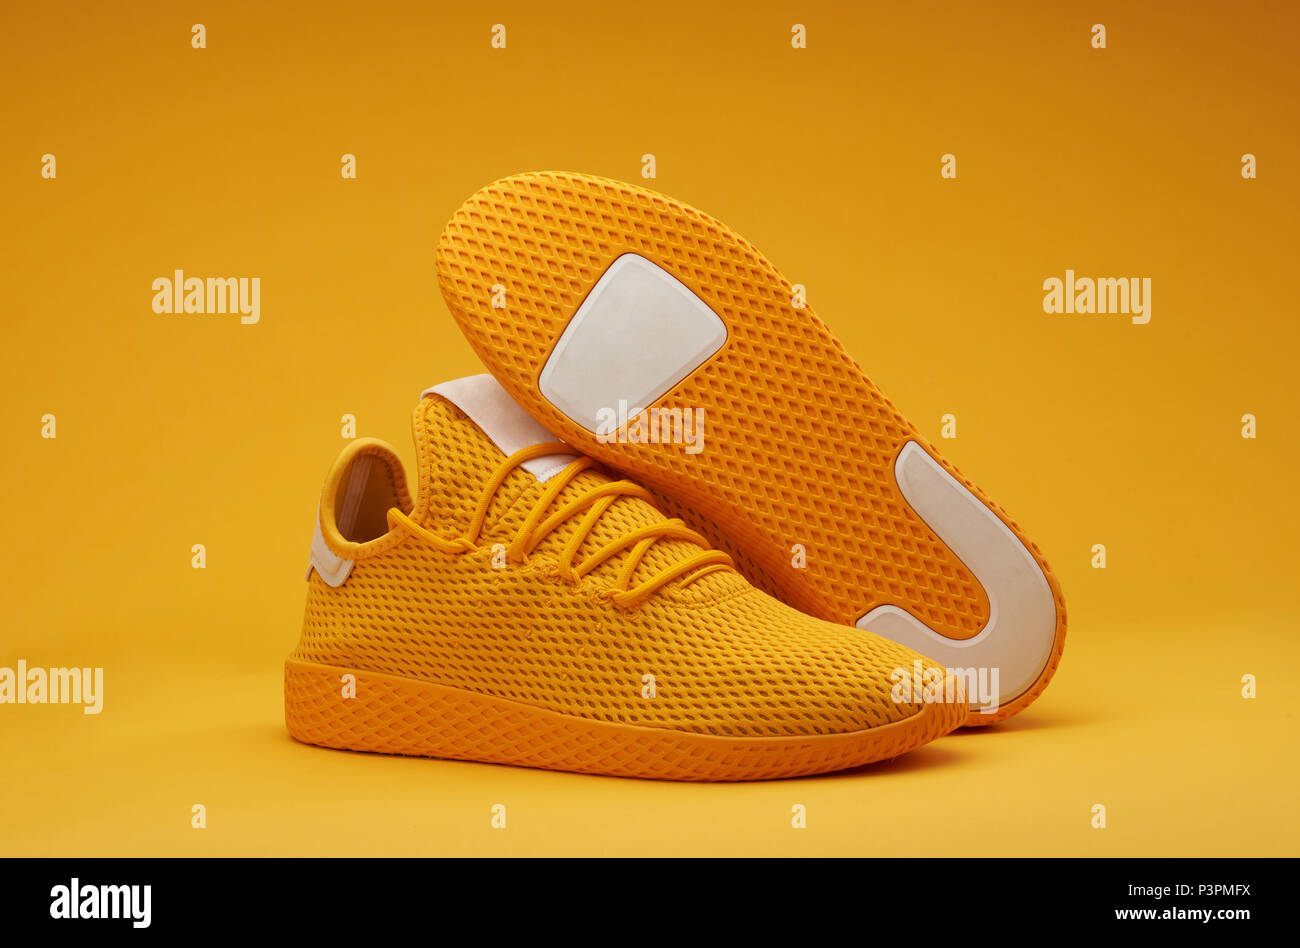 Sport shoes theme in yellow color. Pair of tennis shoes Stock Photo